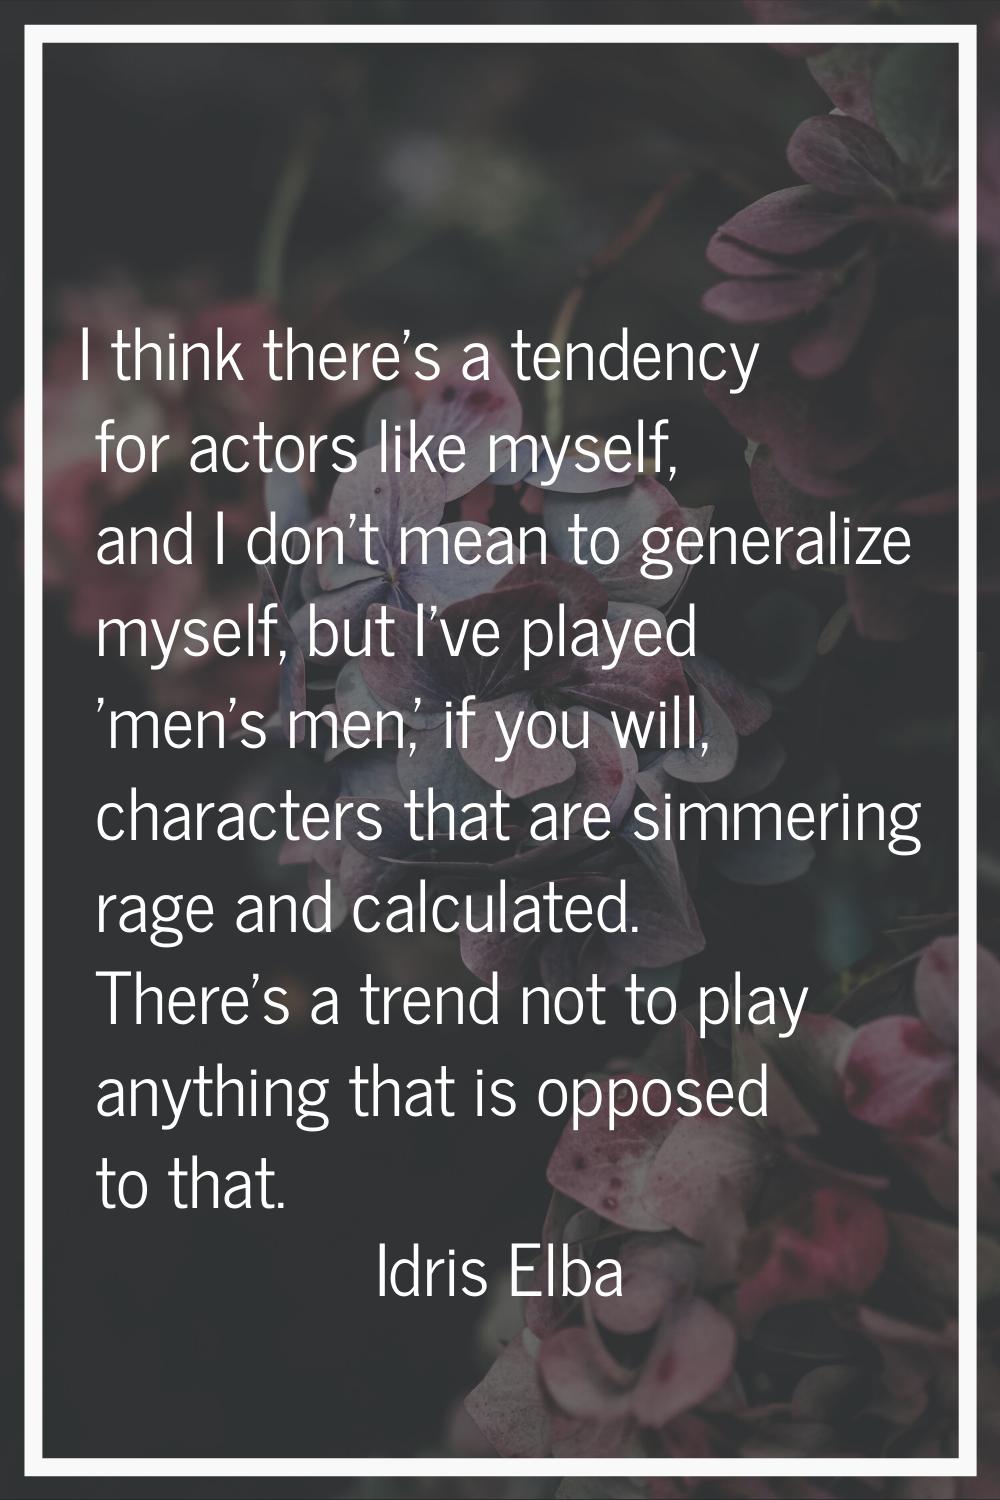 I think there's a tendency for actors like myself, and I don't mean to generalize myself, but I've 